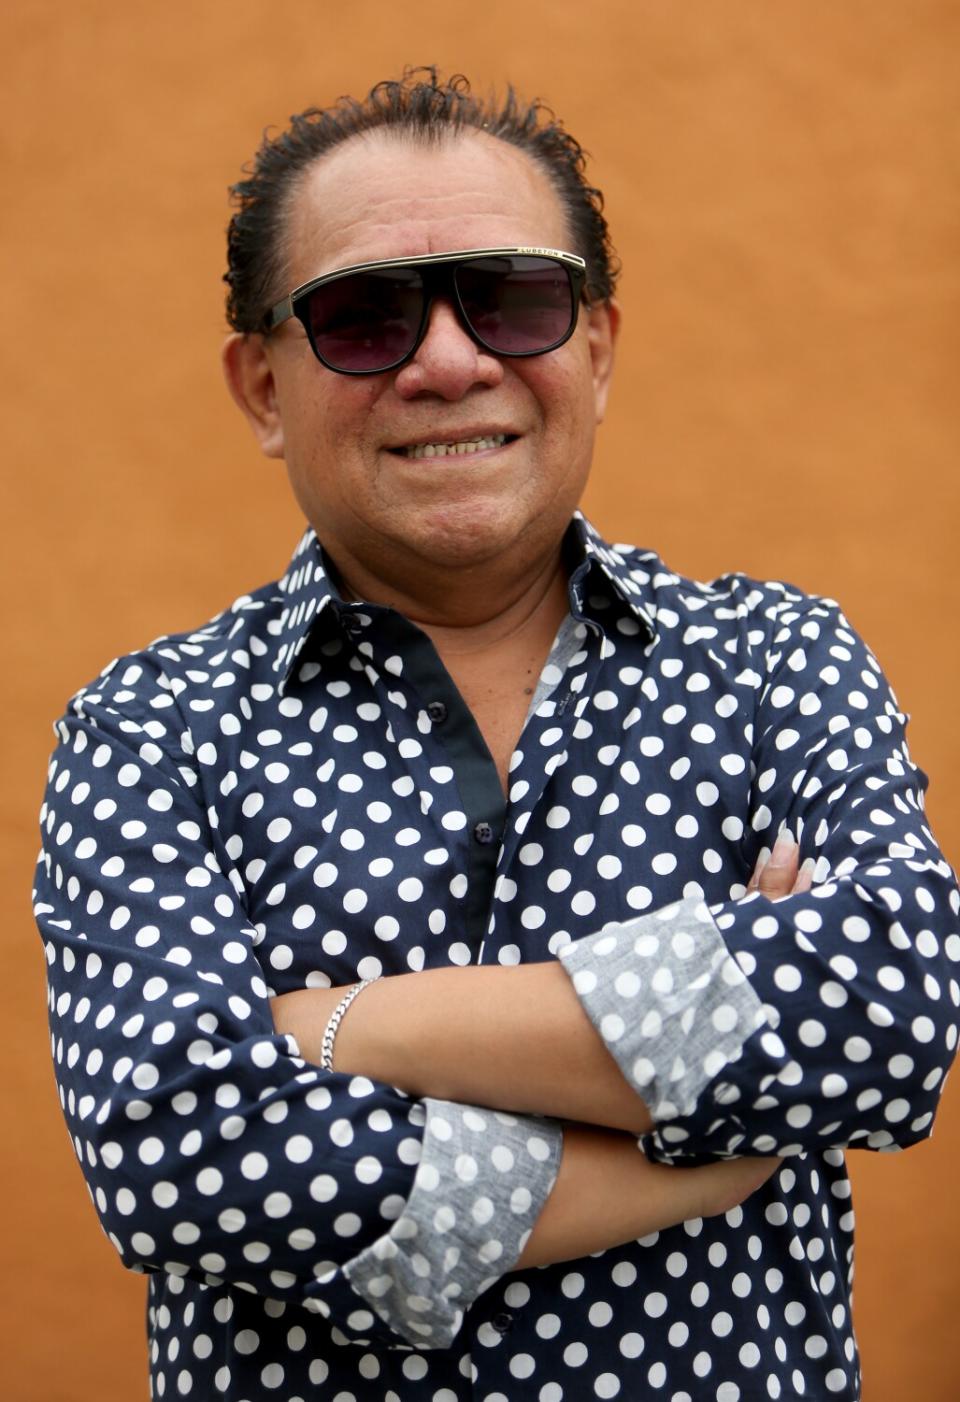 A man in a patterned button-down and black sunglasses crosses his arms